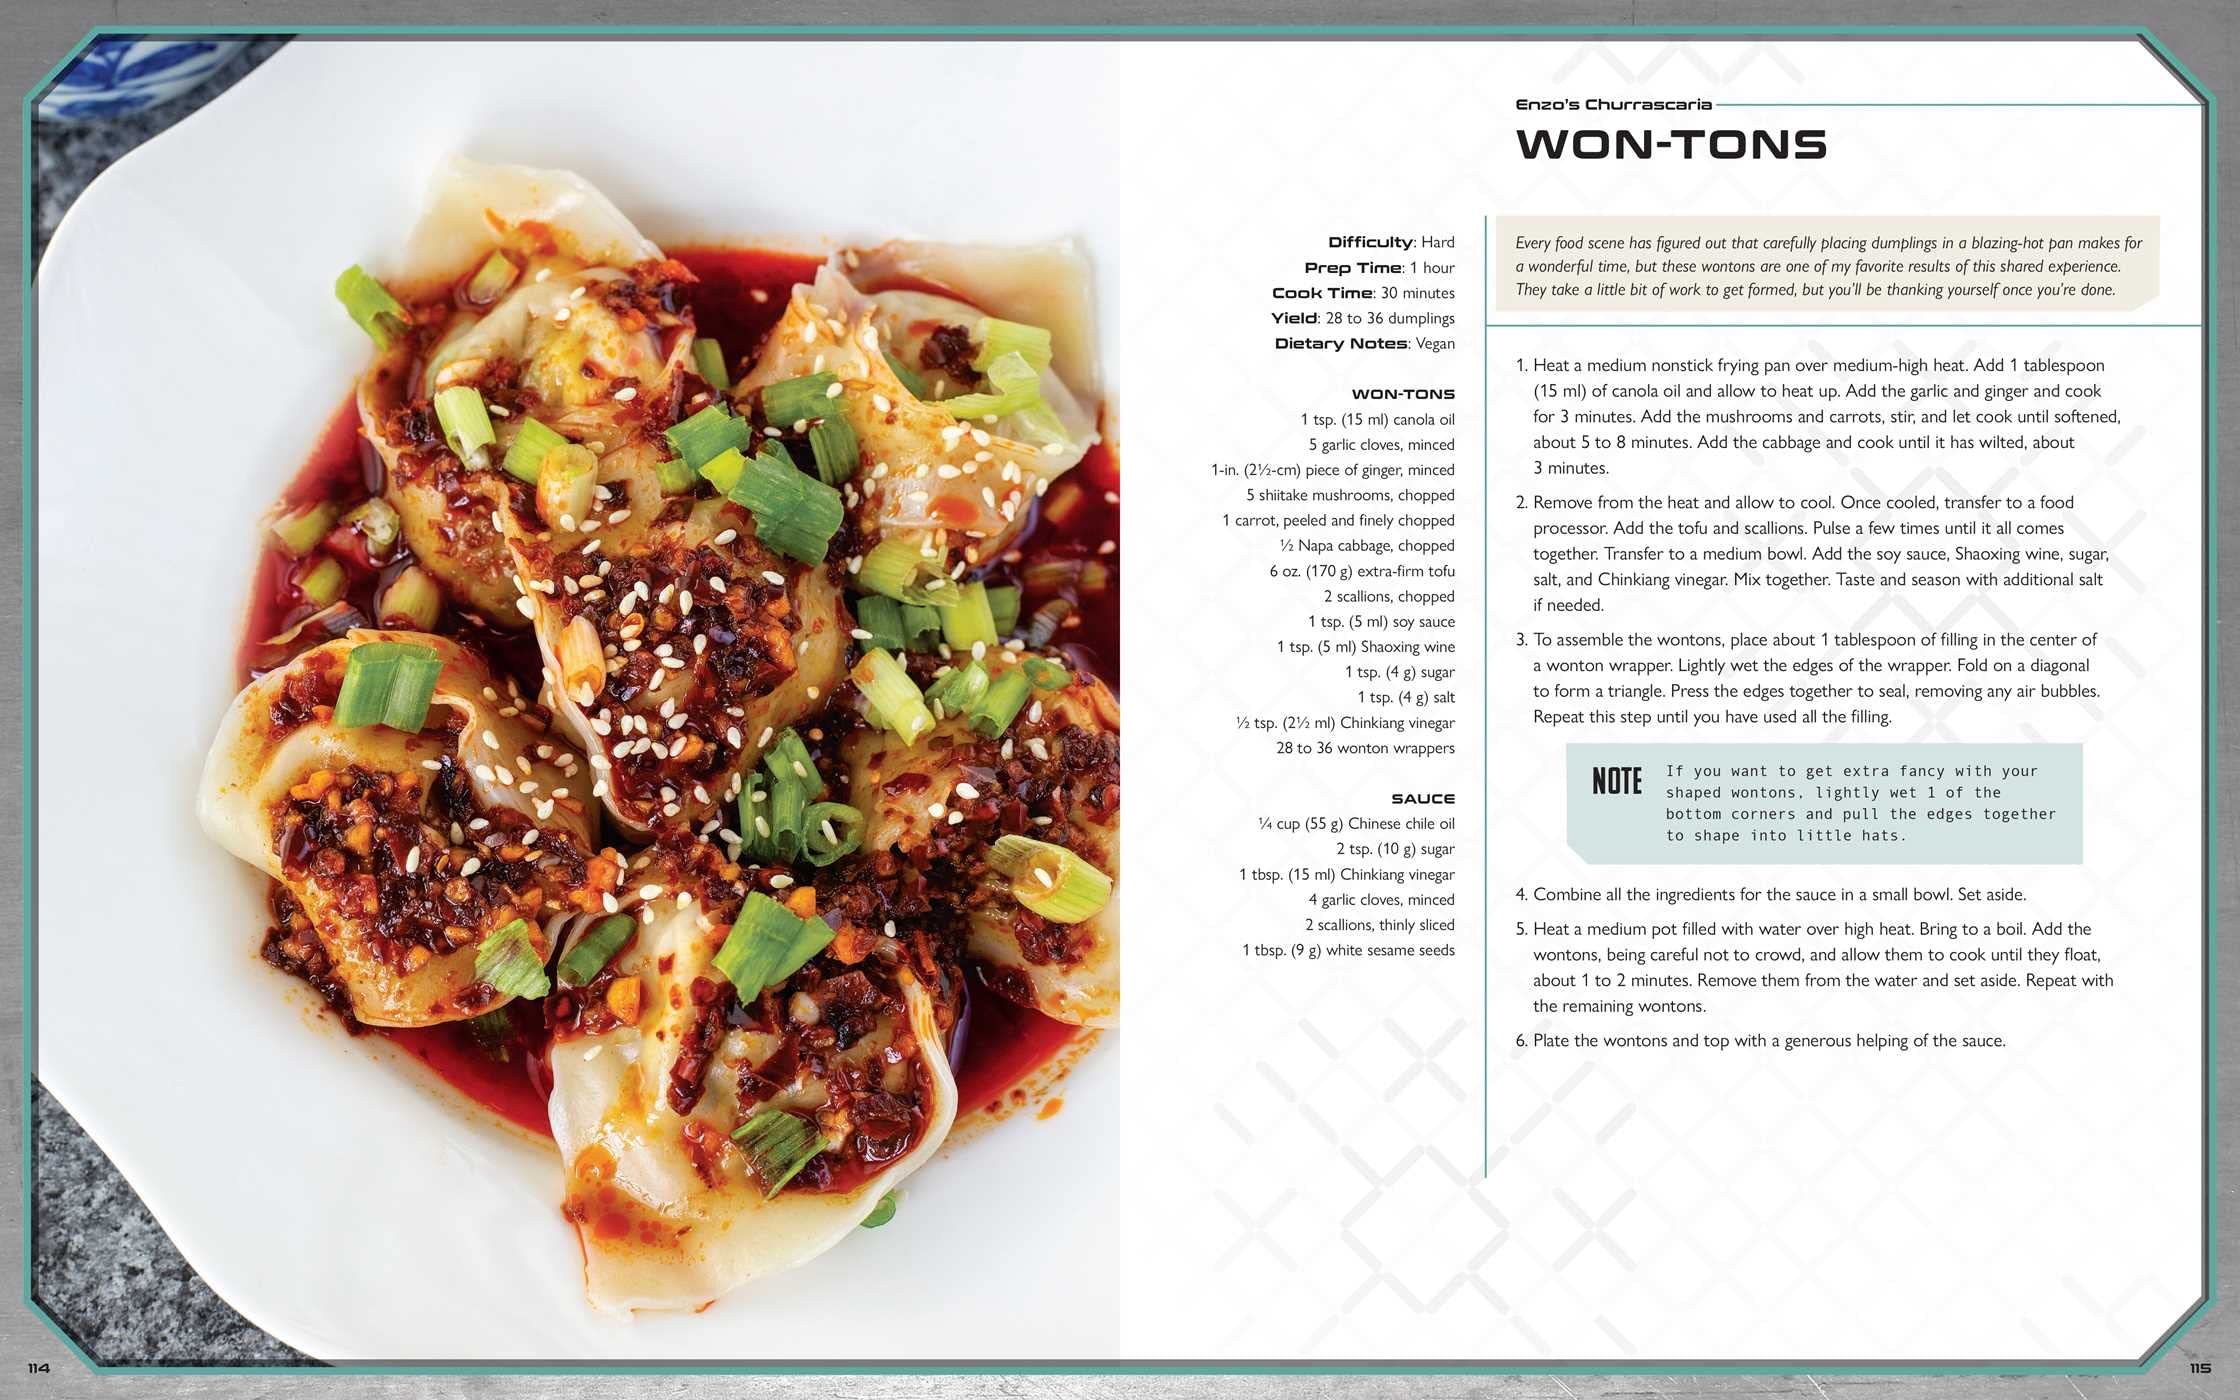 Halo: The Official Cookbook recipe preview for won-tons